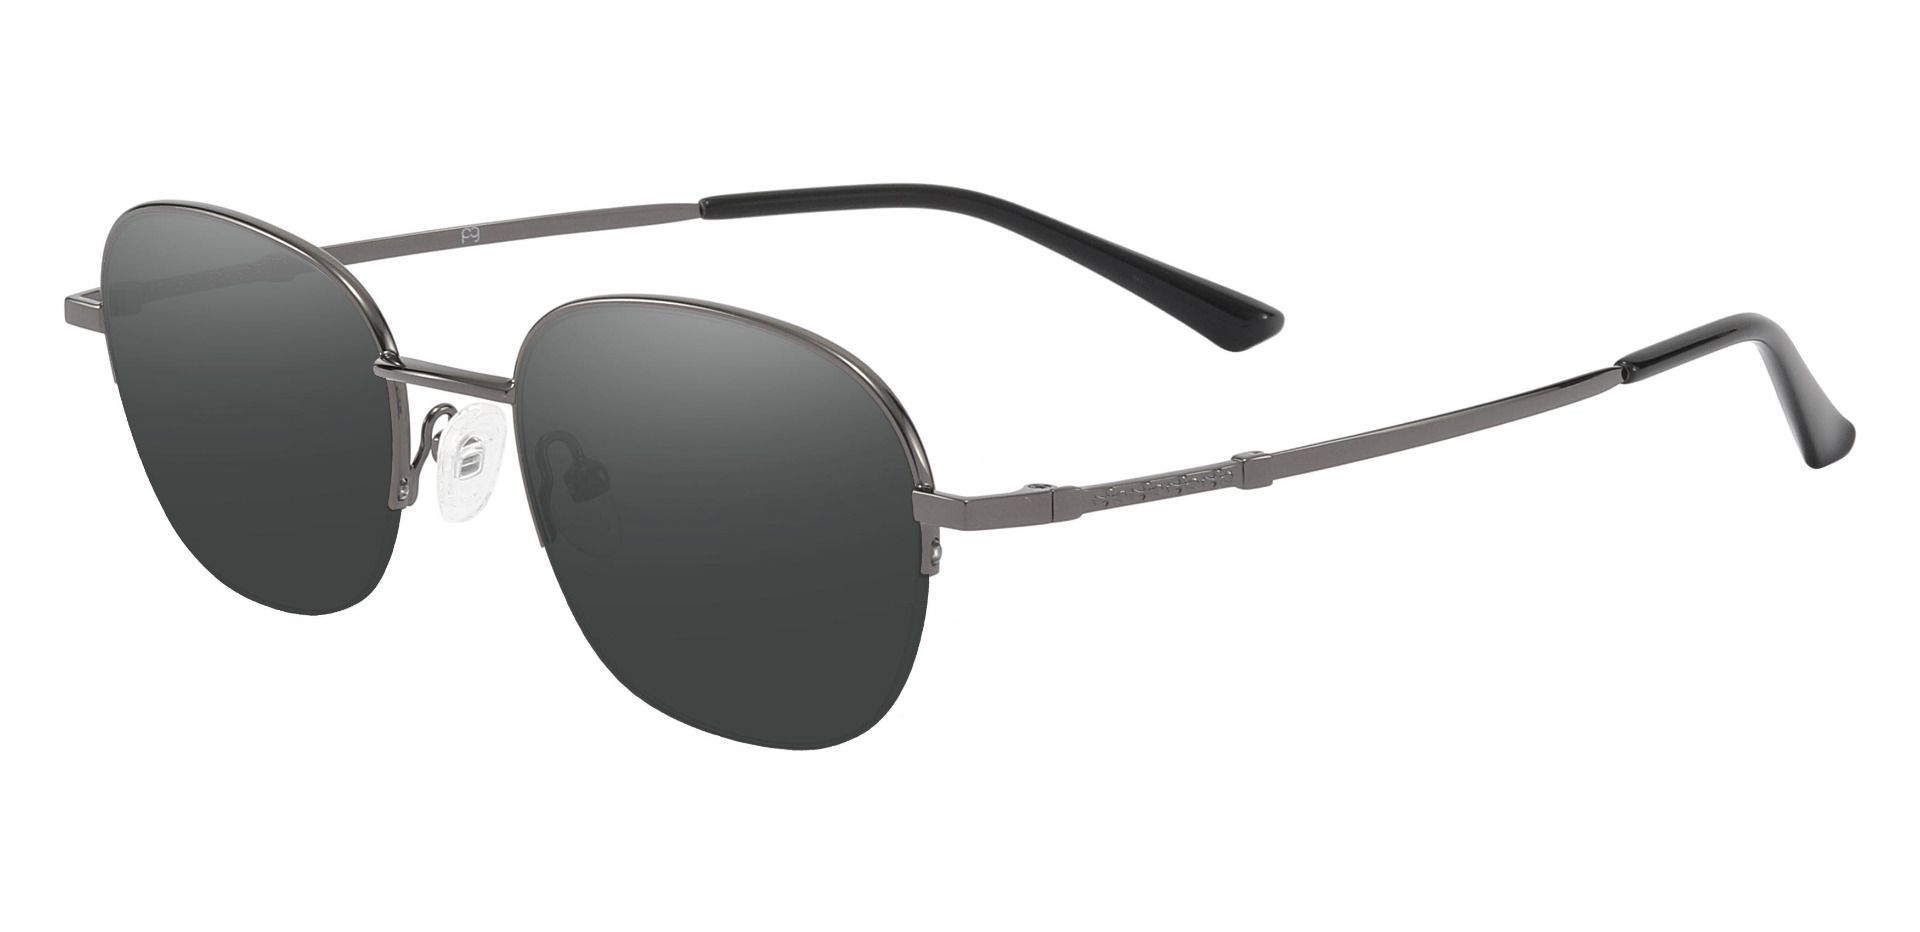 Rochester Oval Reading Sunglasses - Gray Frame With Gray Lenses